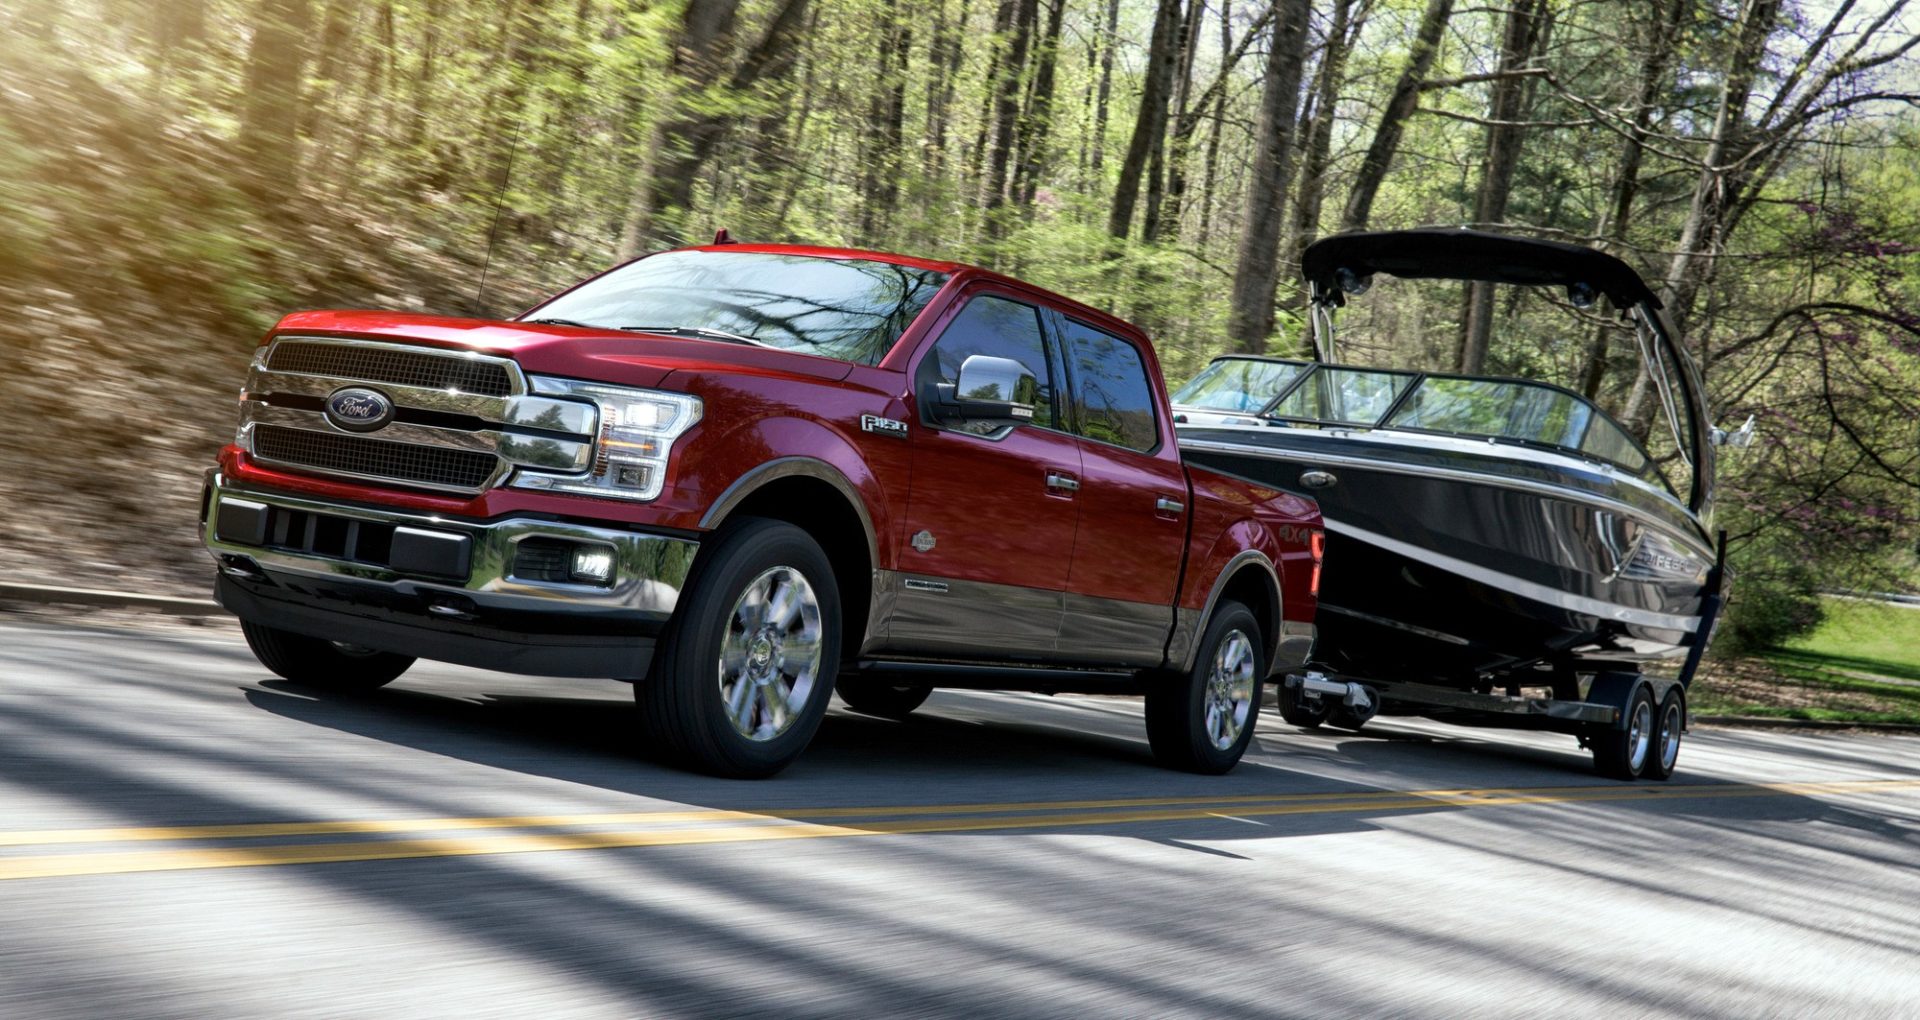 Ford towing